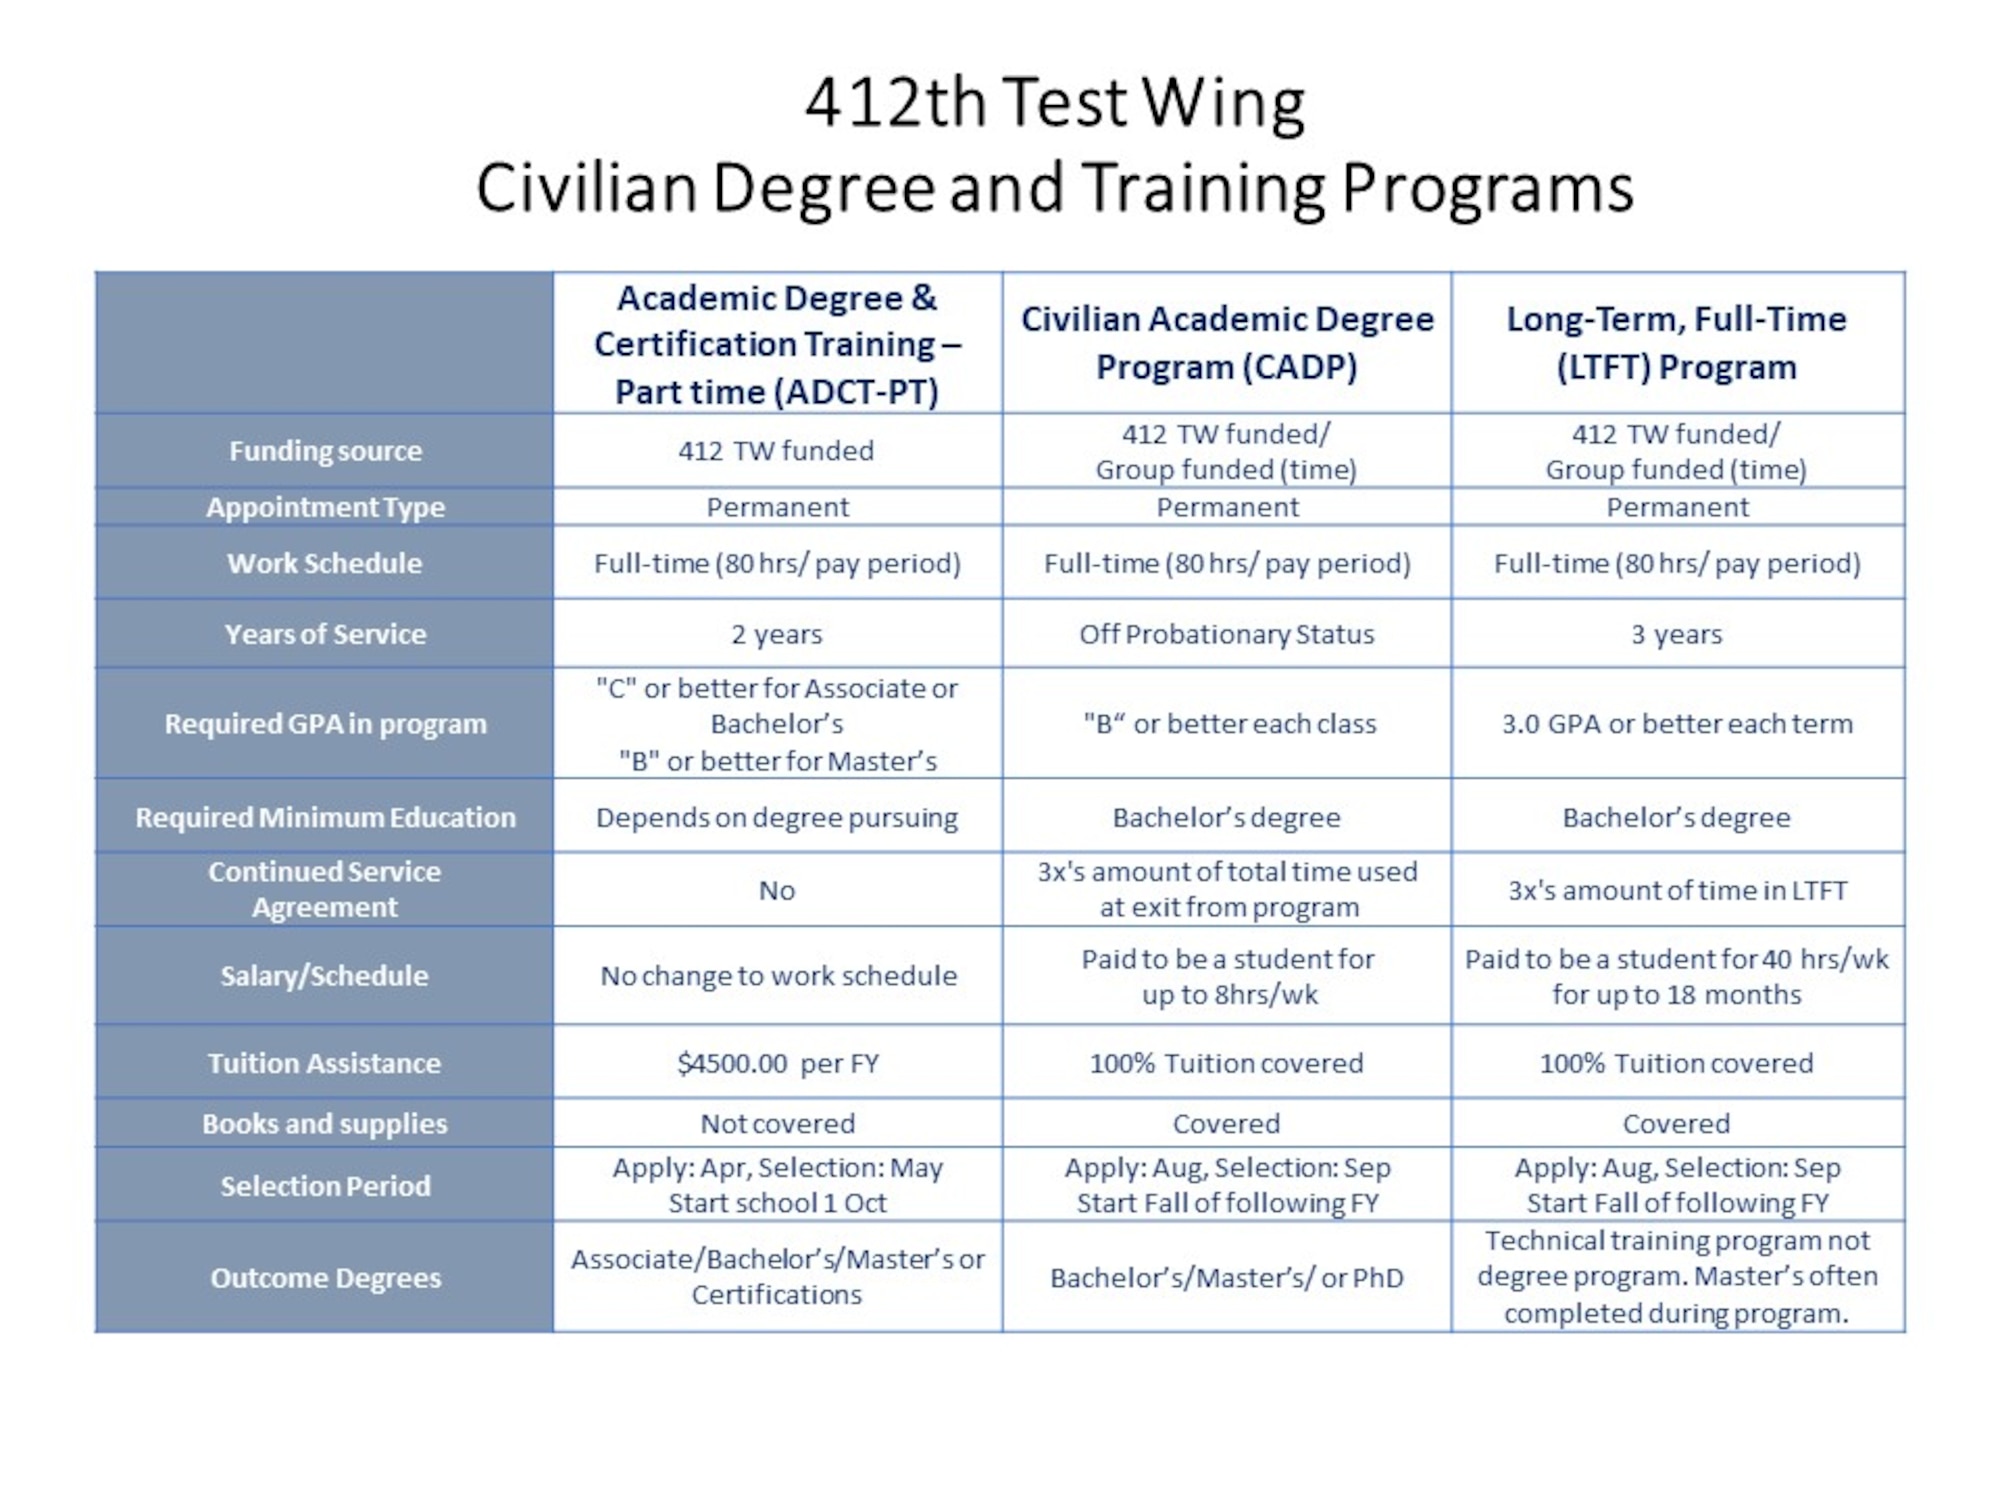 The 412th Test Wing recently made changes to the Civilian Degree and Training Programs with the addition of a new tuition assistance program, the Civilian Academic Degree Program. The 412th TW now has three programs augmenting the Air Force Civilian Tuition Assistance Program: Academic Degree & Certification Training, and Long-Term, Full-Time Program, and the new CADP.